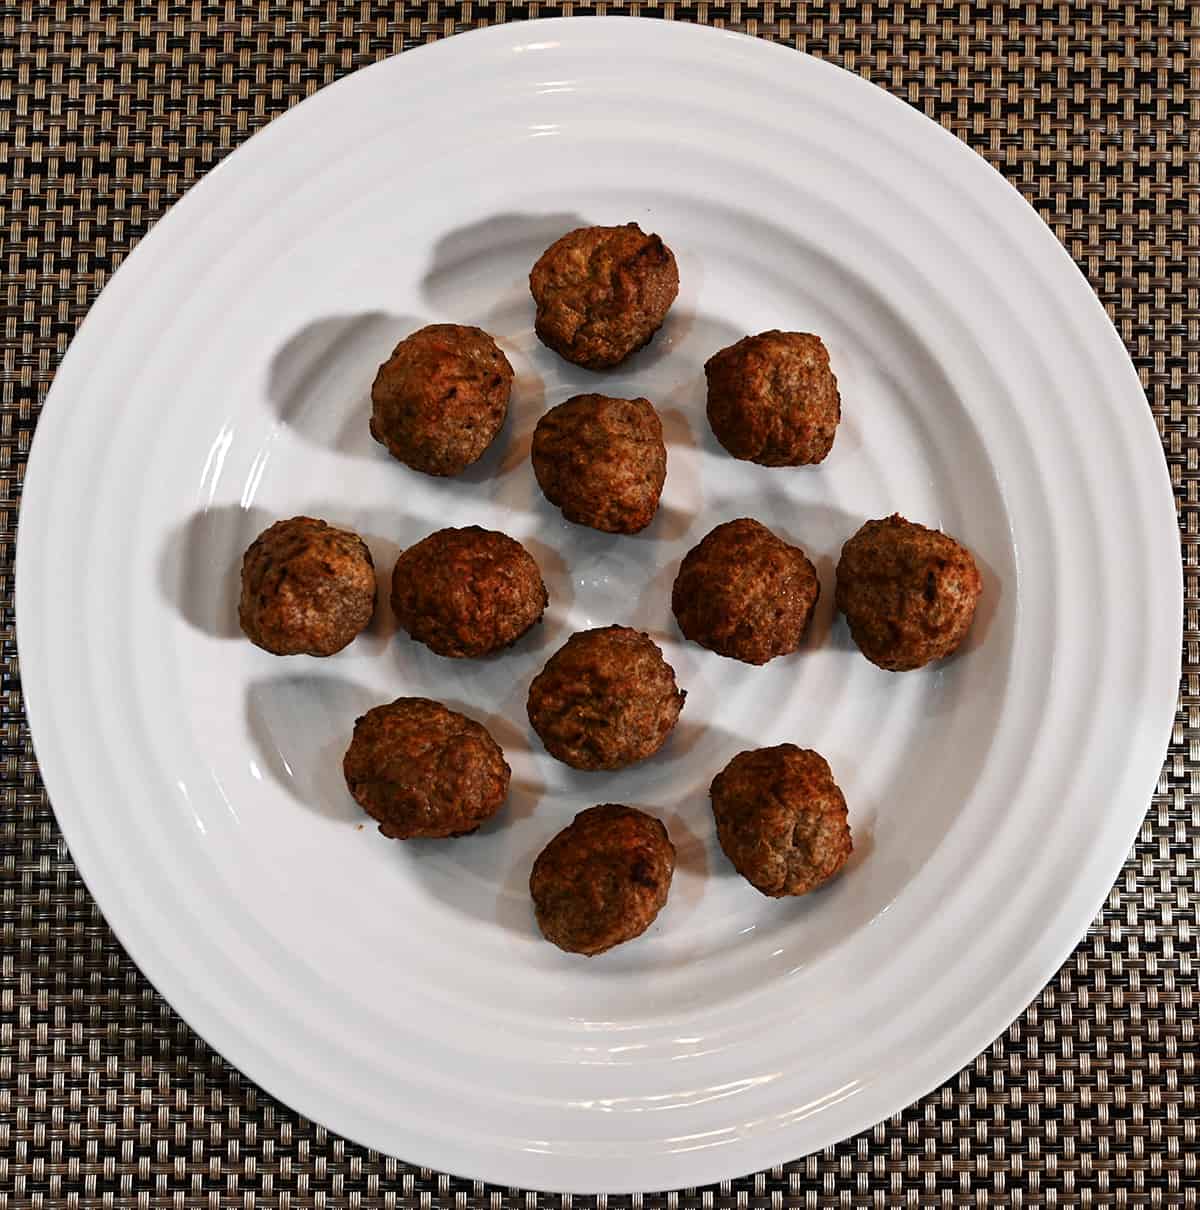 Top down image of a plate of cooked meatballs.